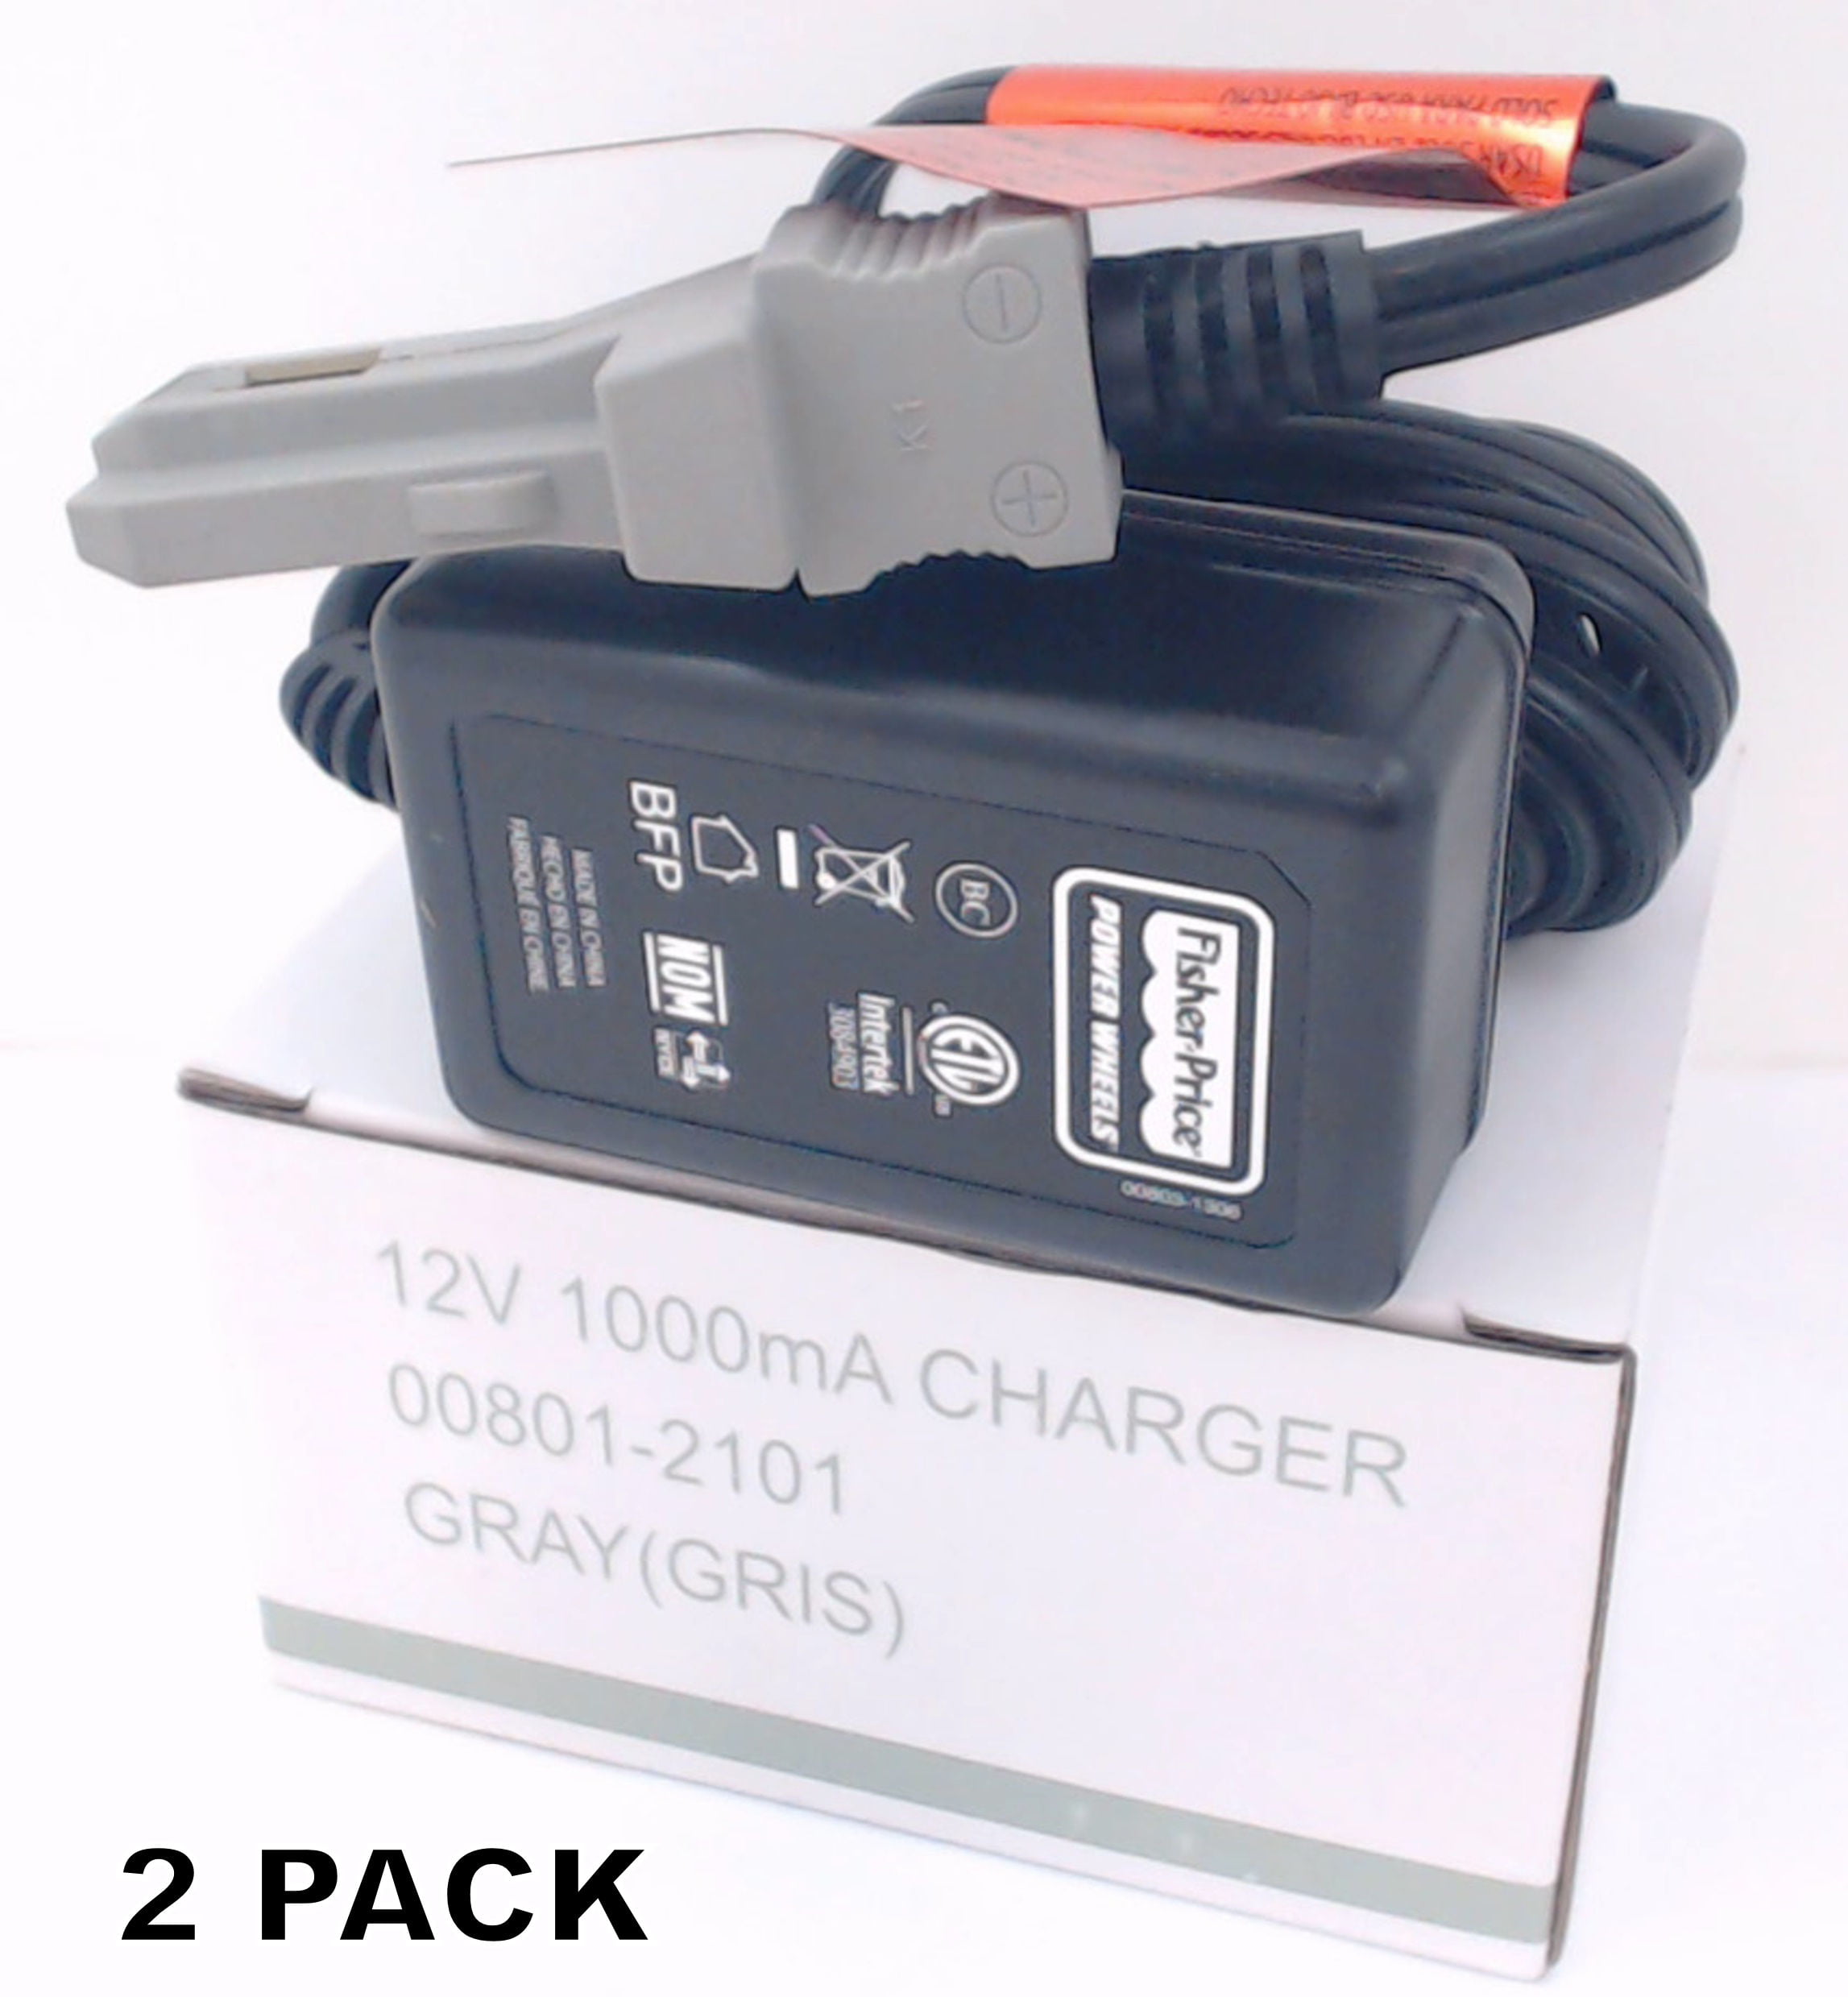 Power Wheels 00801-1480 GRAY Battery Charger Genuine Fisher Price 